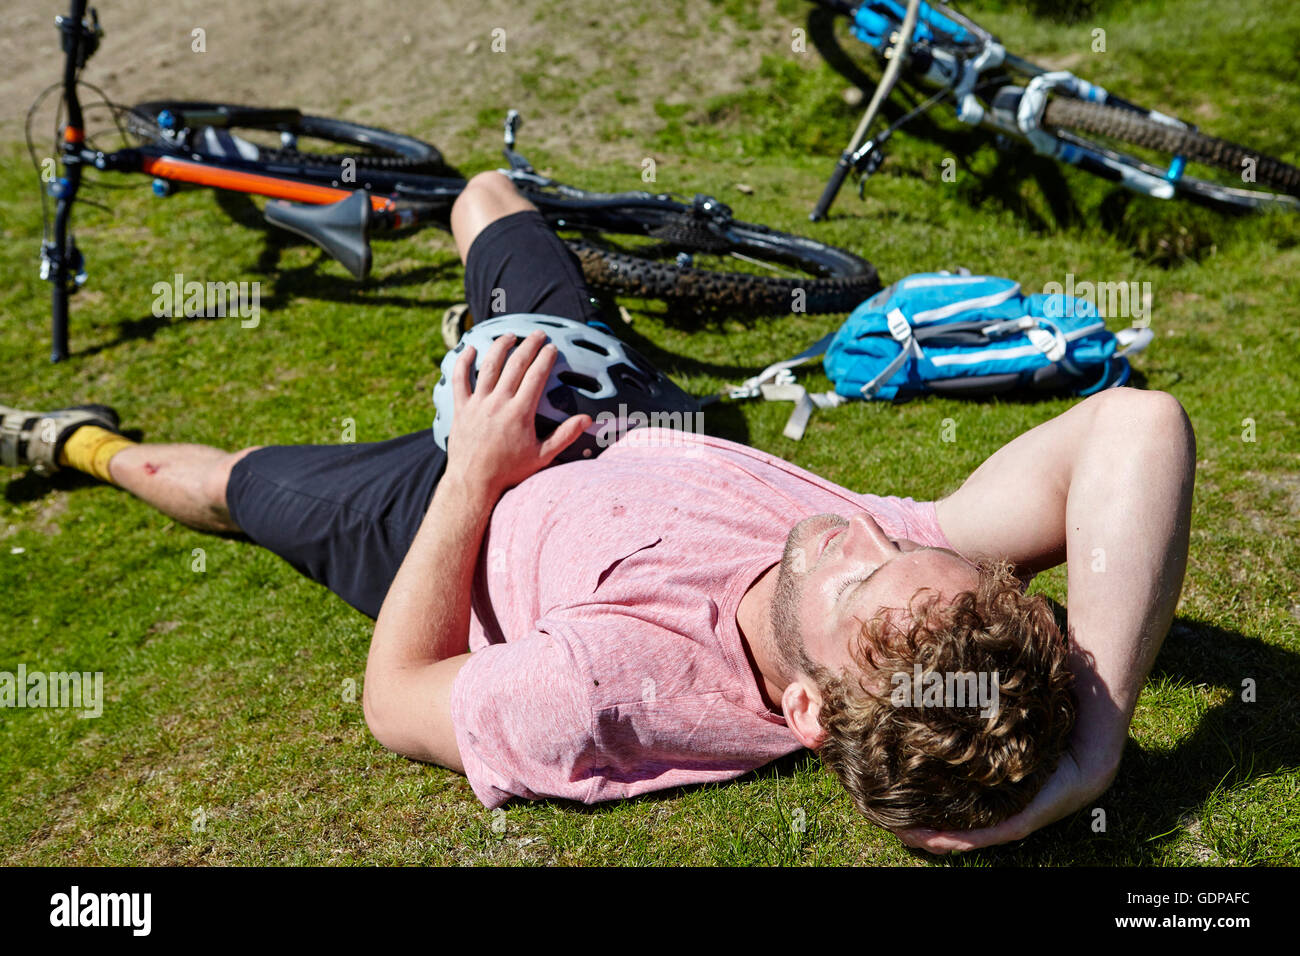 Cyclist lying down on grass by bicycle Stock Photo